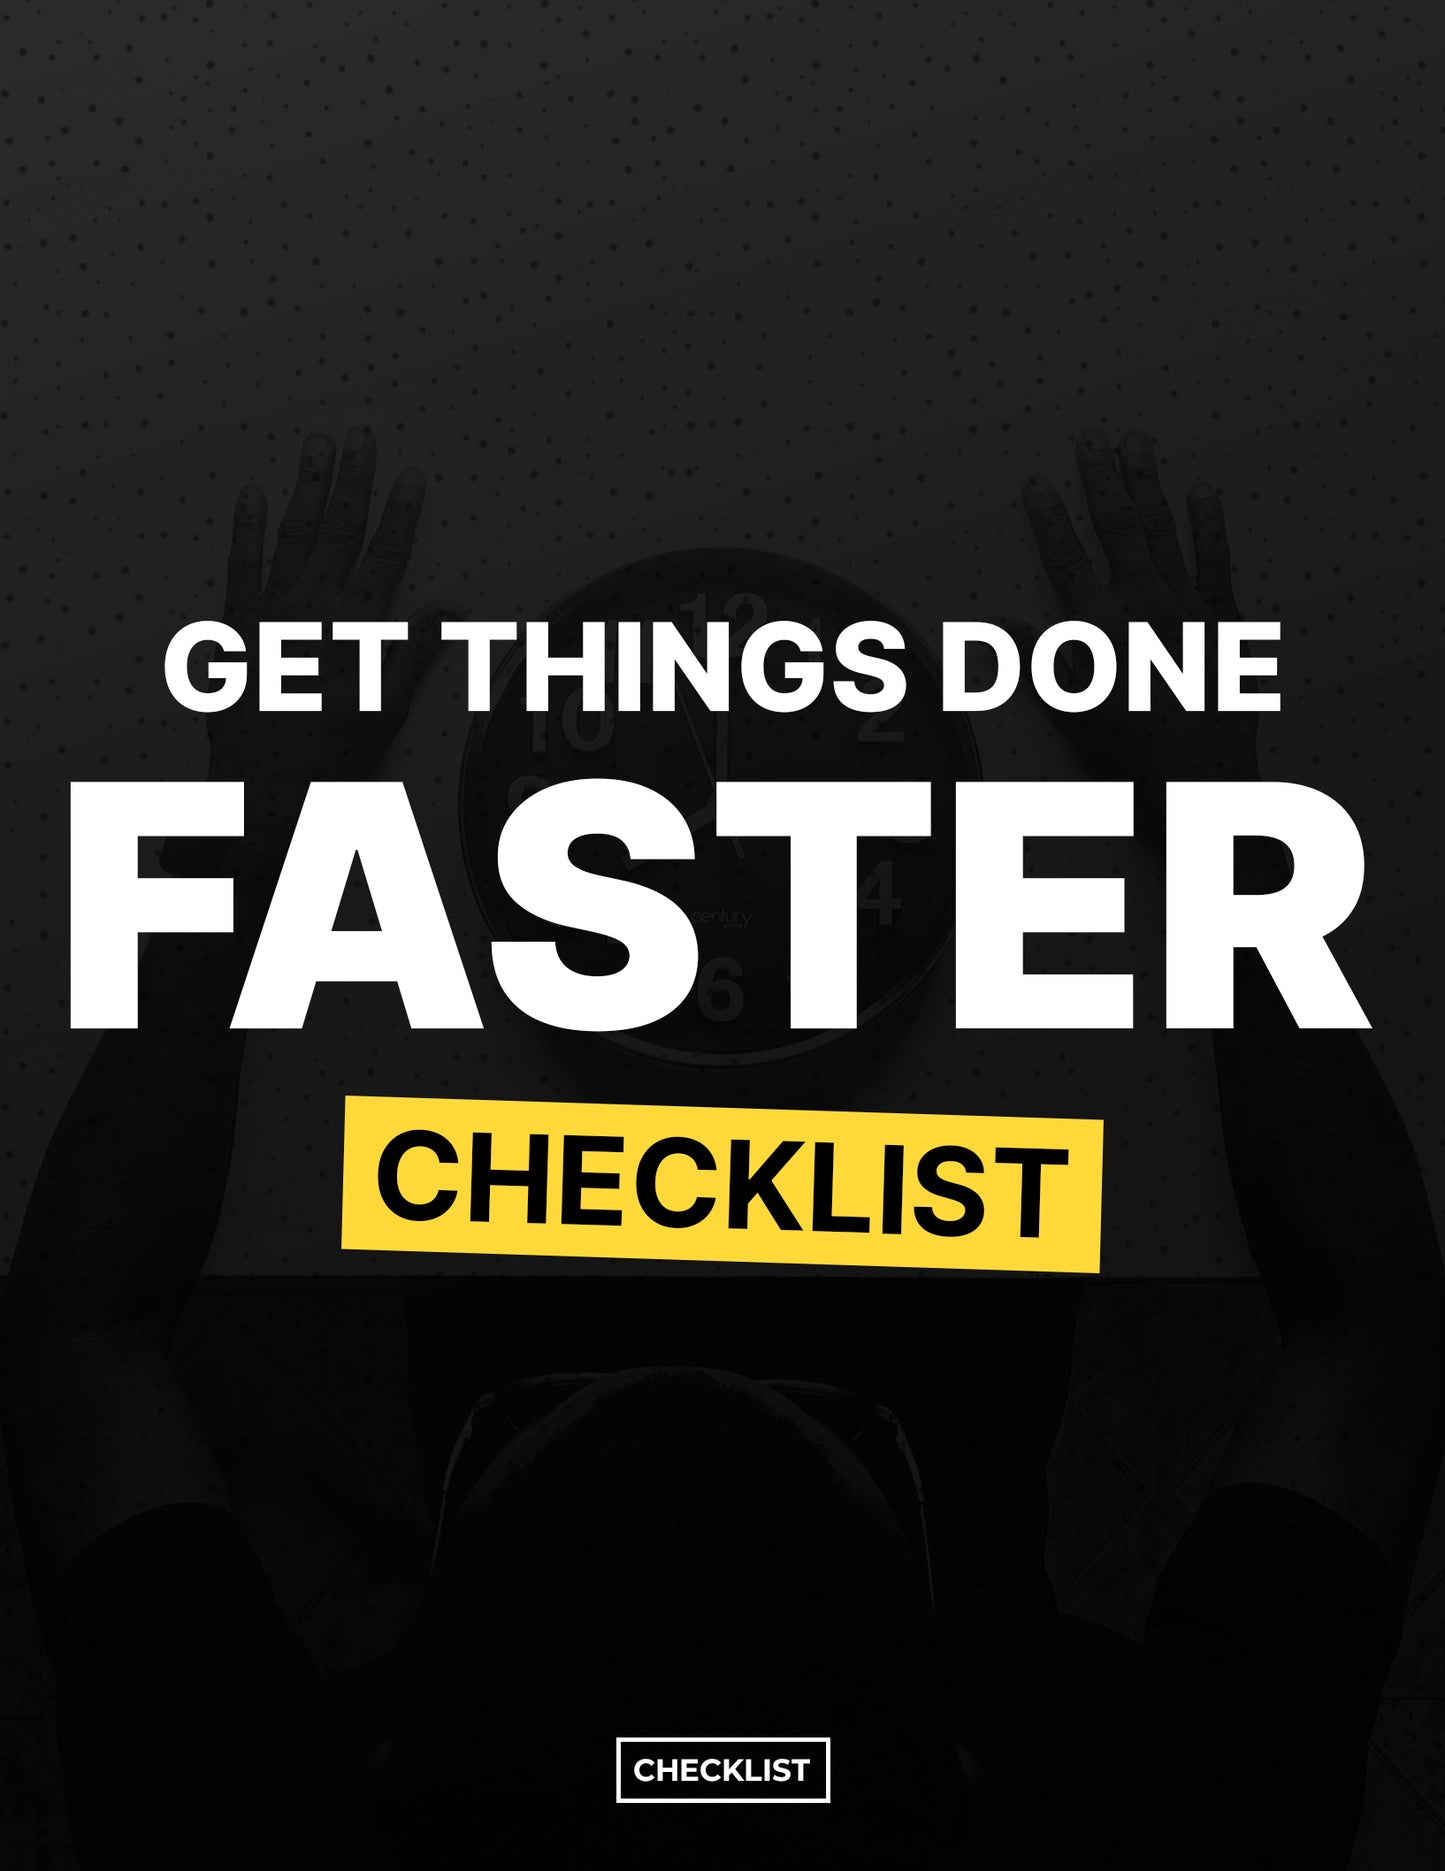 Get Things Done Faster Packages